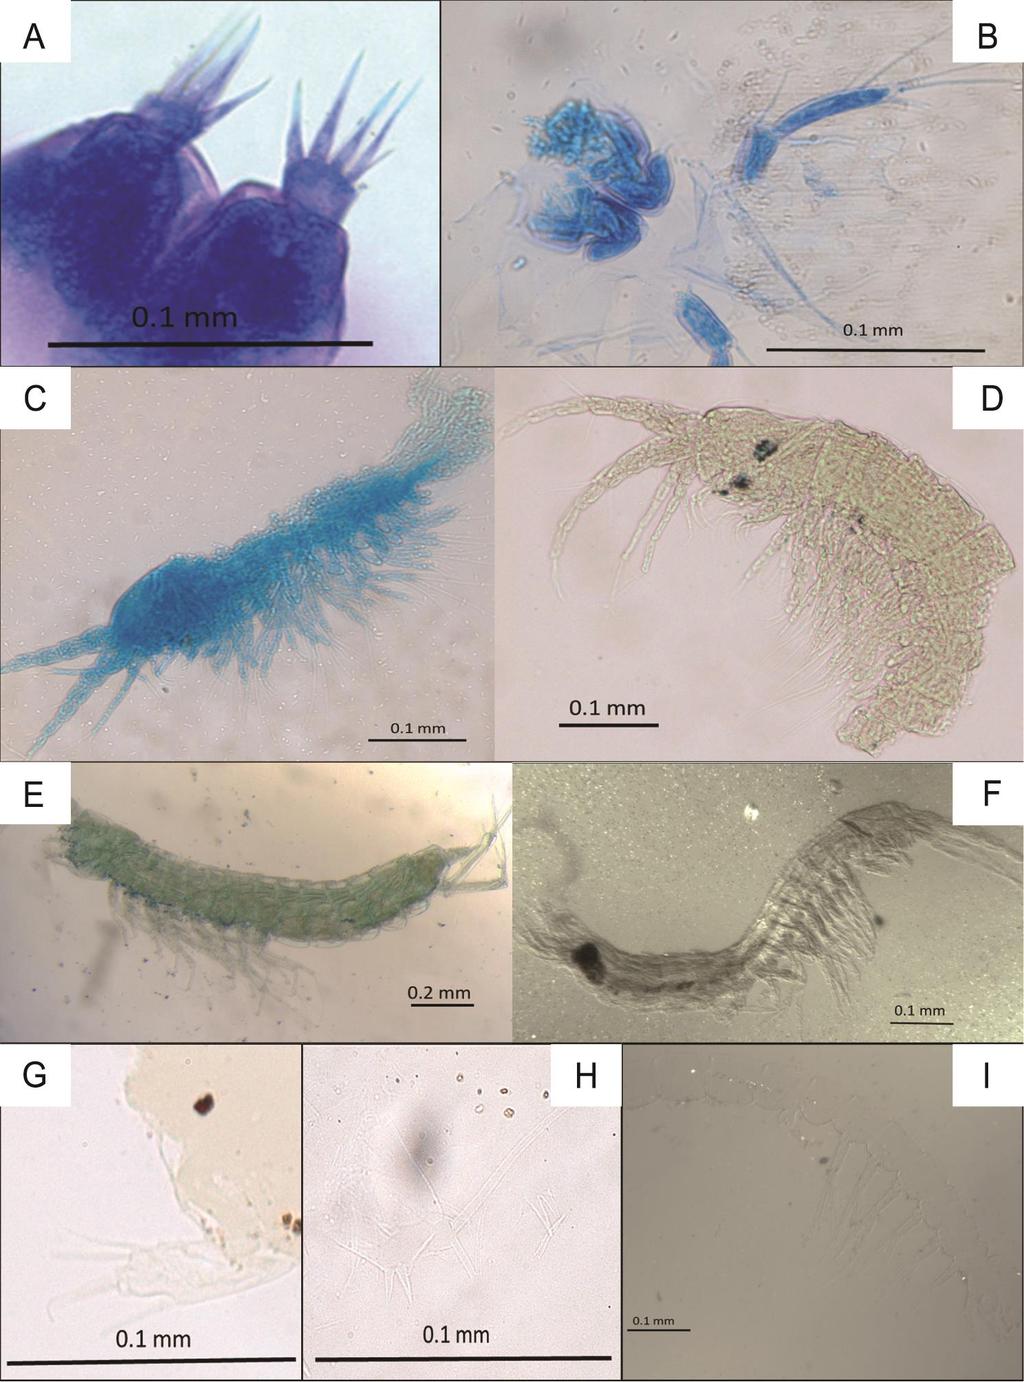 Figure 4. Images of Bathynellacea prepared with different methods. A-B-C: bathynellid furca, male thoracopod VIII and pleopod, half body in stained glycerine jelly (well impregnated tissues).